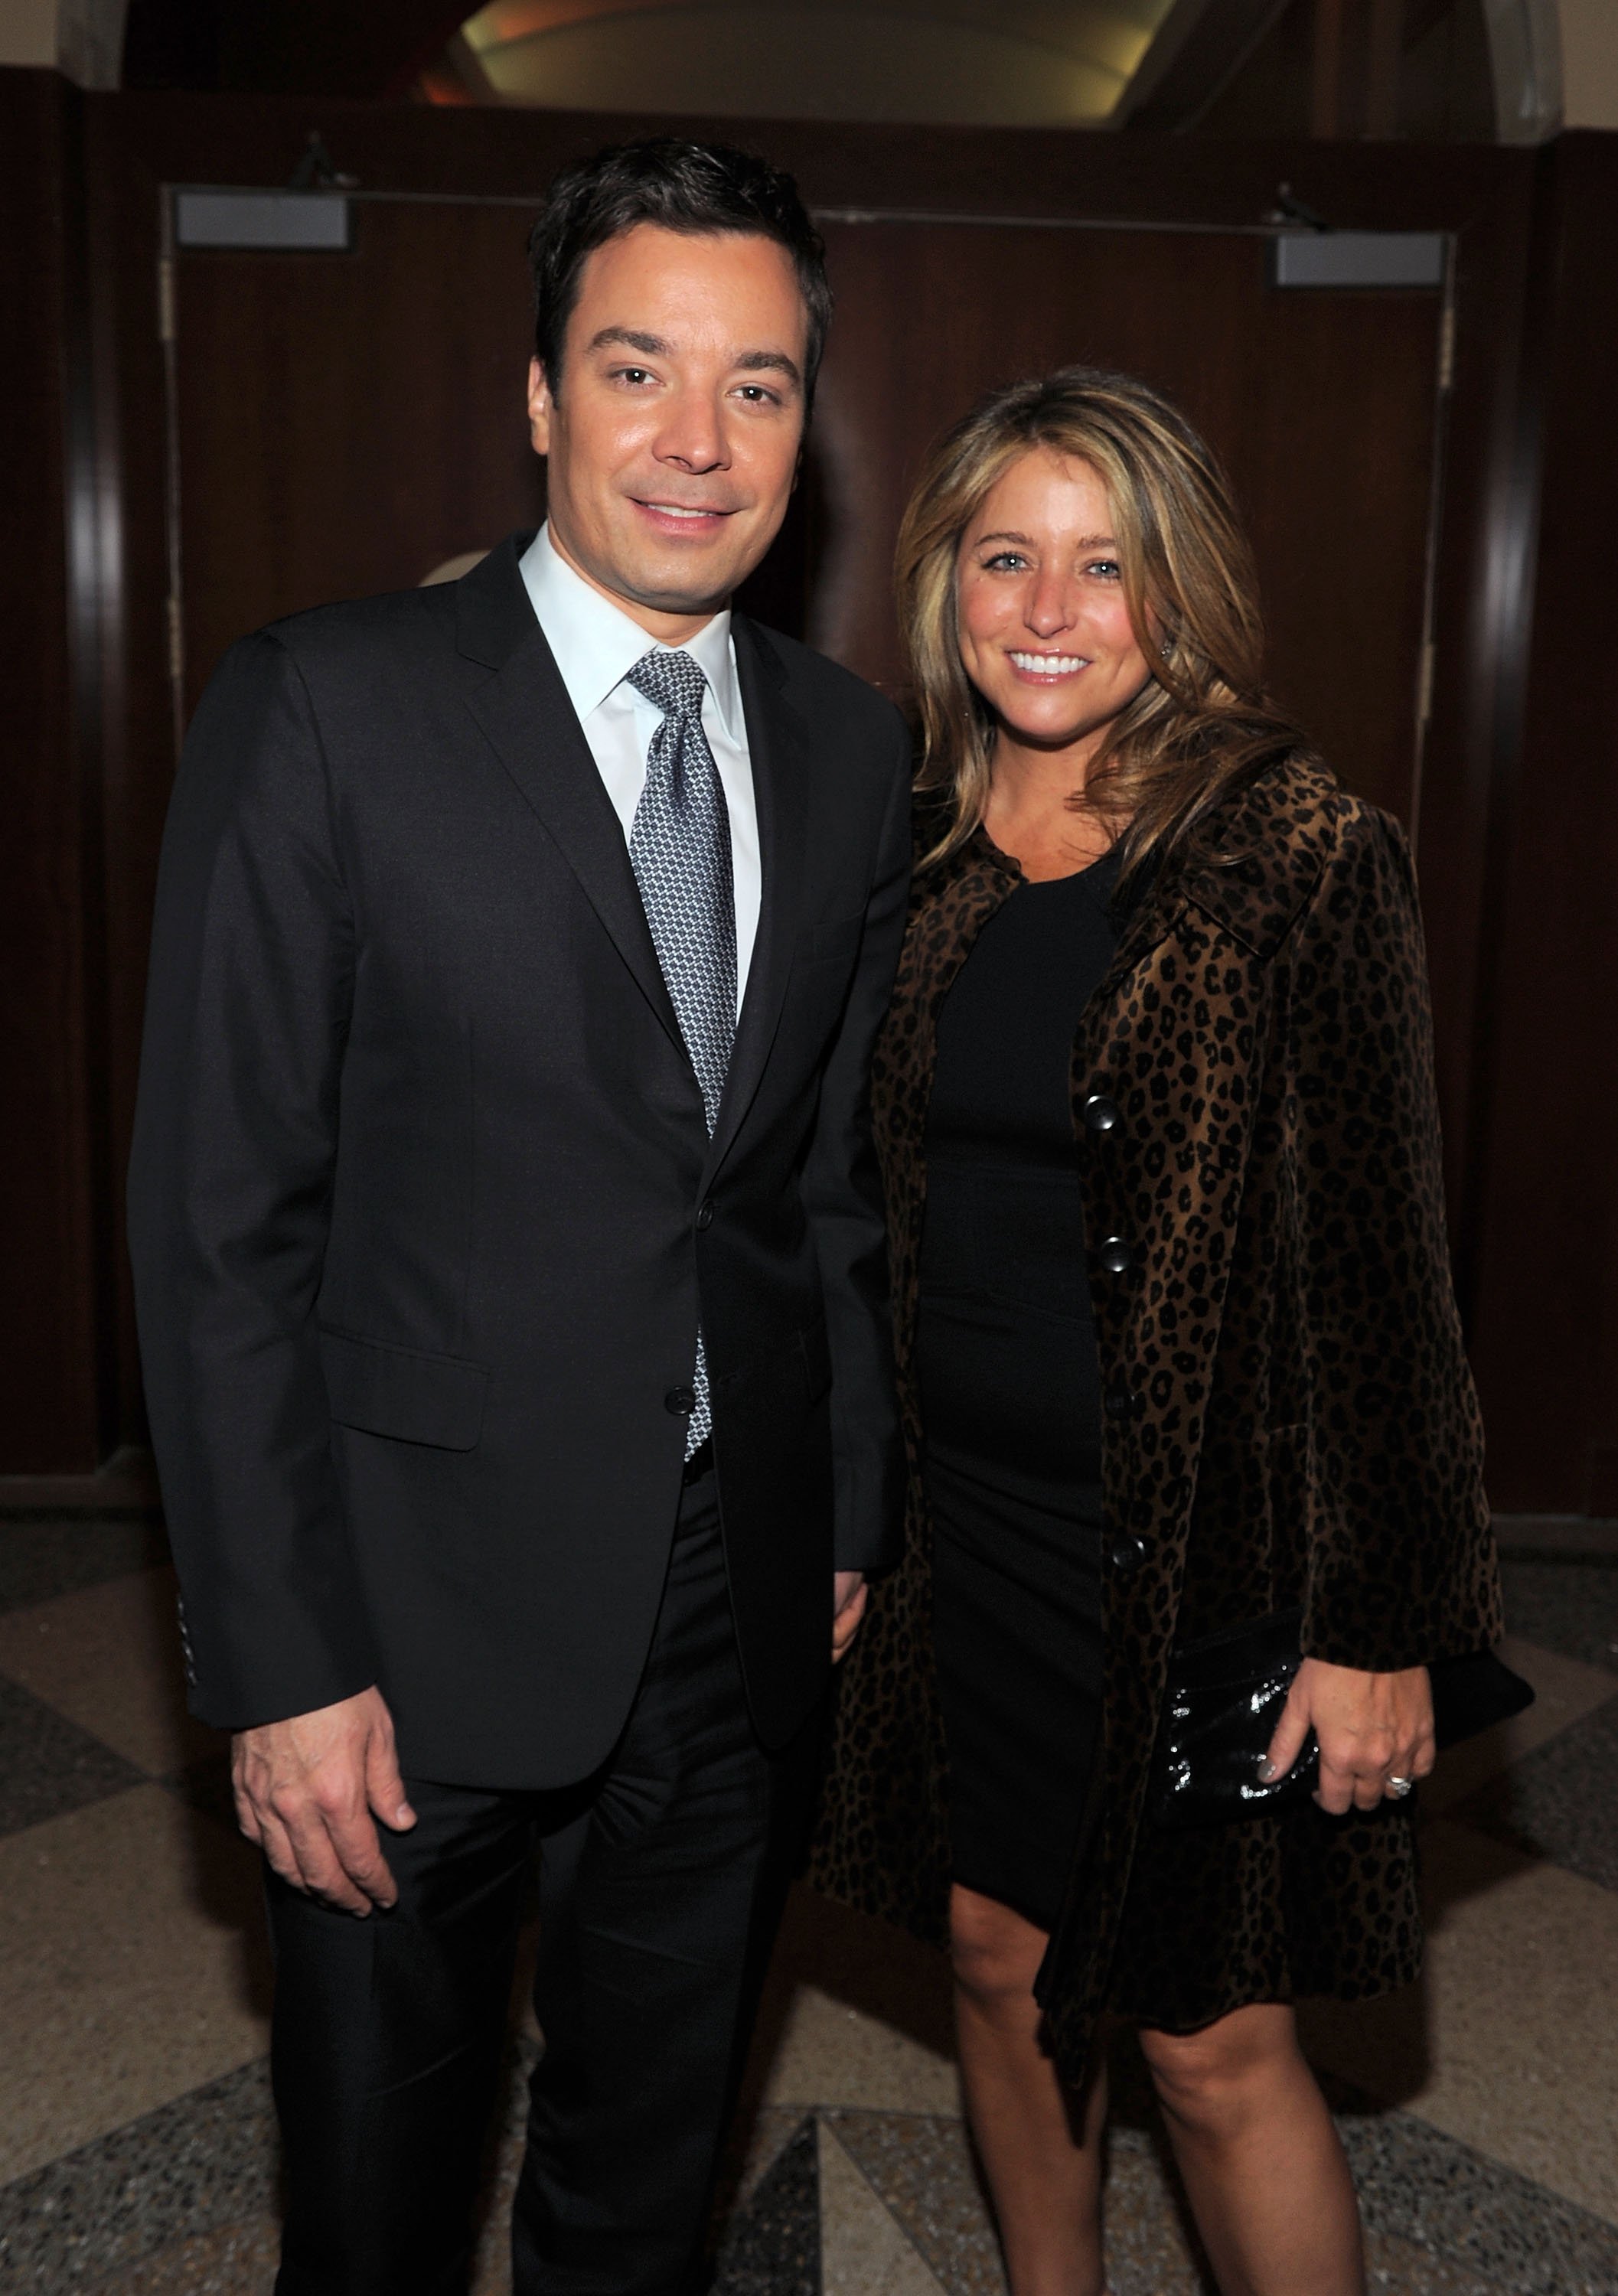 Jimmy Fallon and Nancy Juvonen attend Food Bank For New York City's Annual Can-Do Awards Gala on April 7, 2011, in New York City. | Photo: Getty Images.